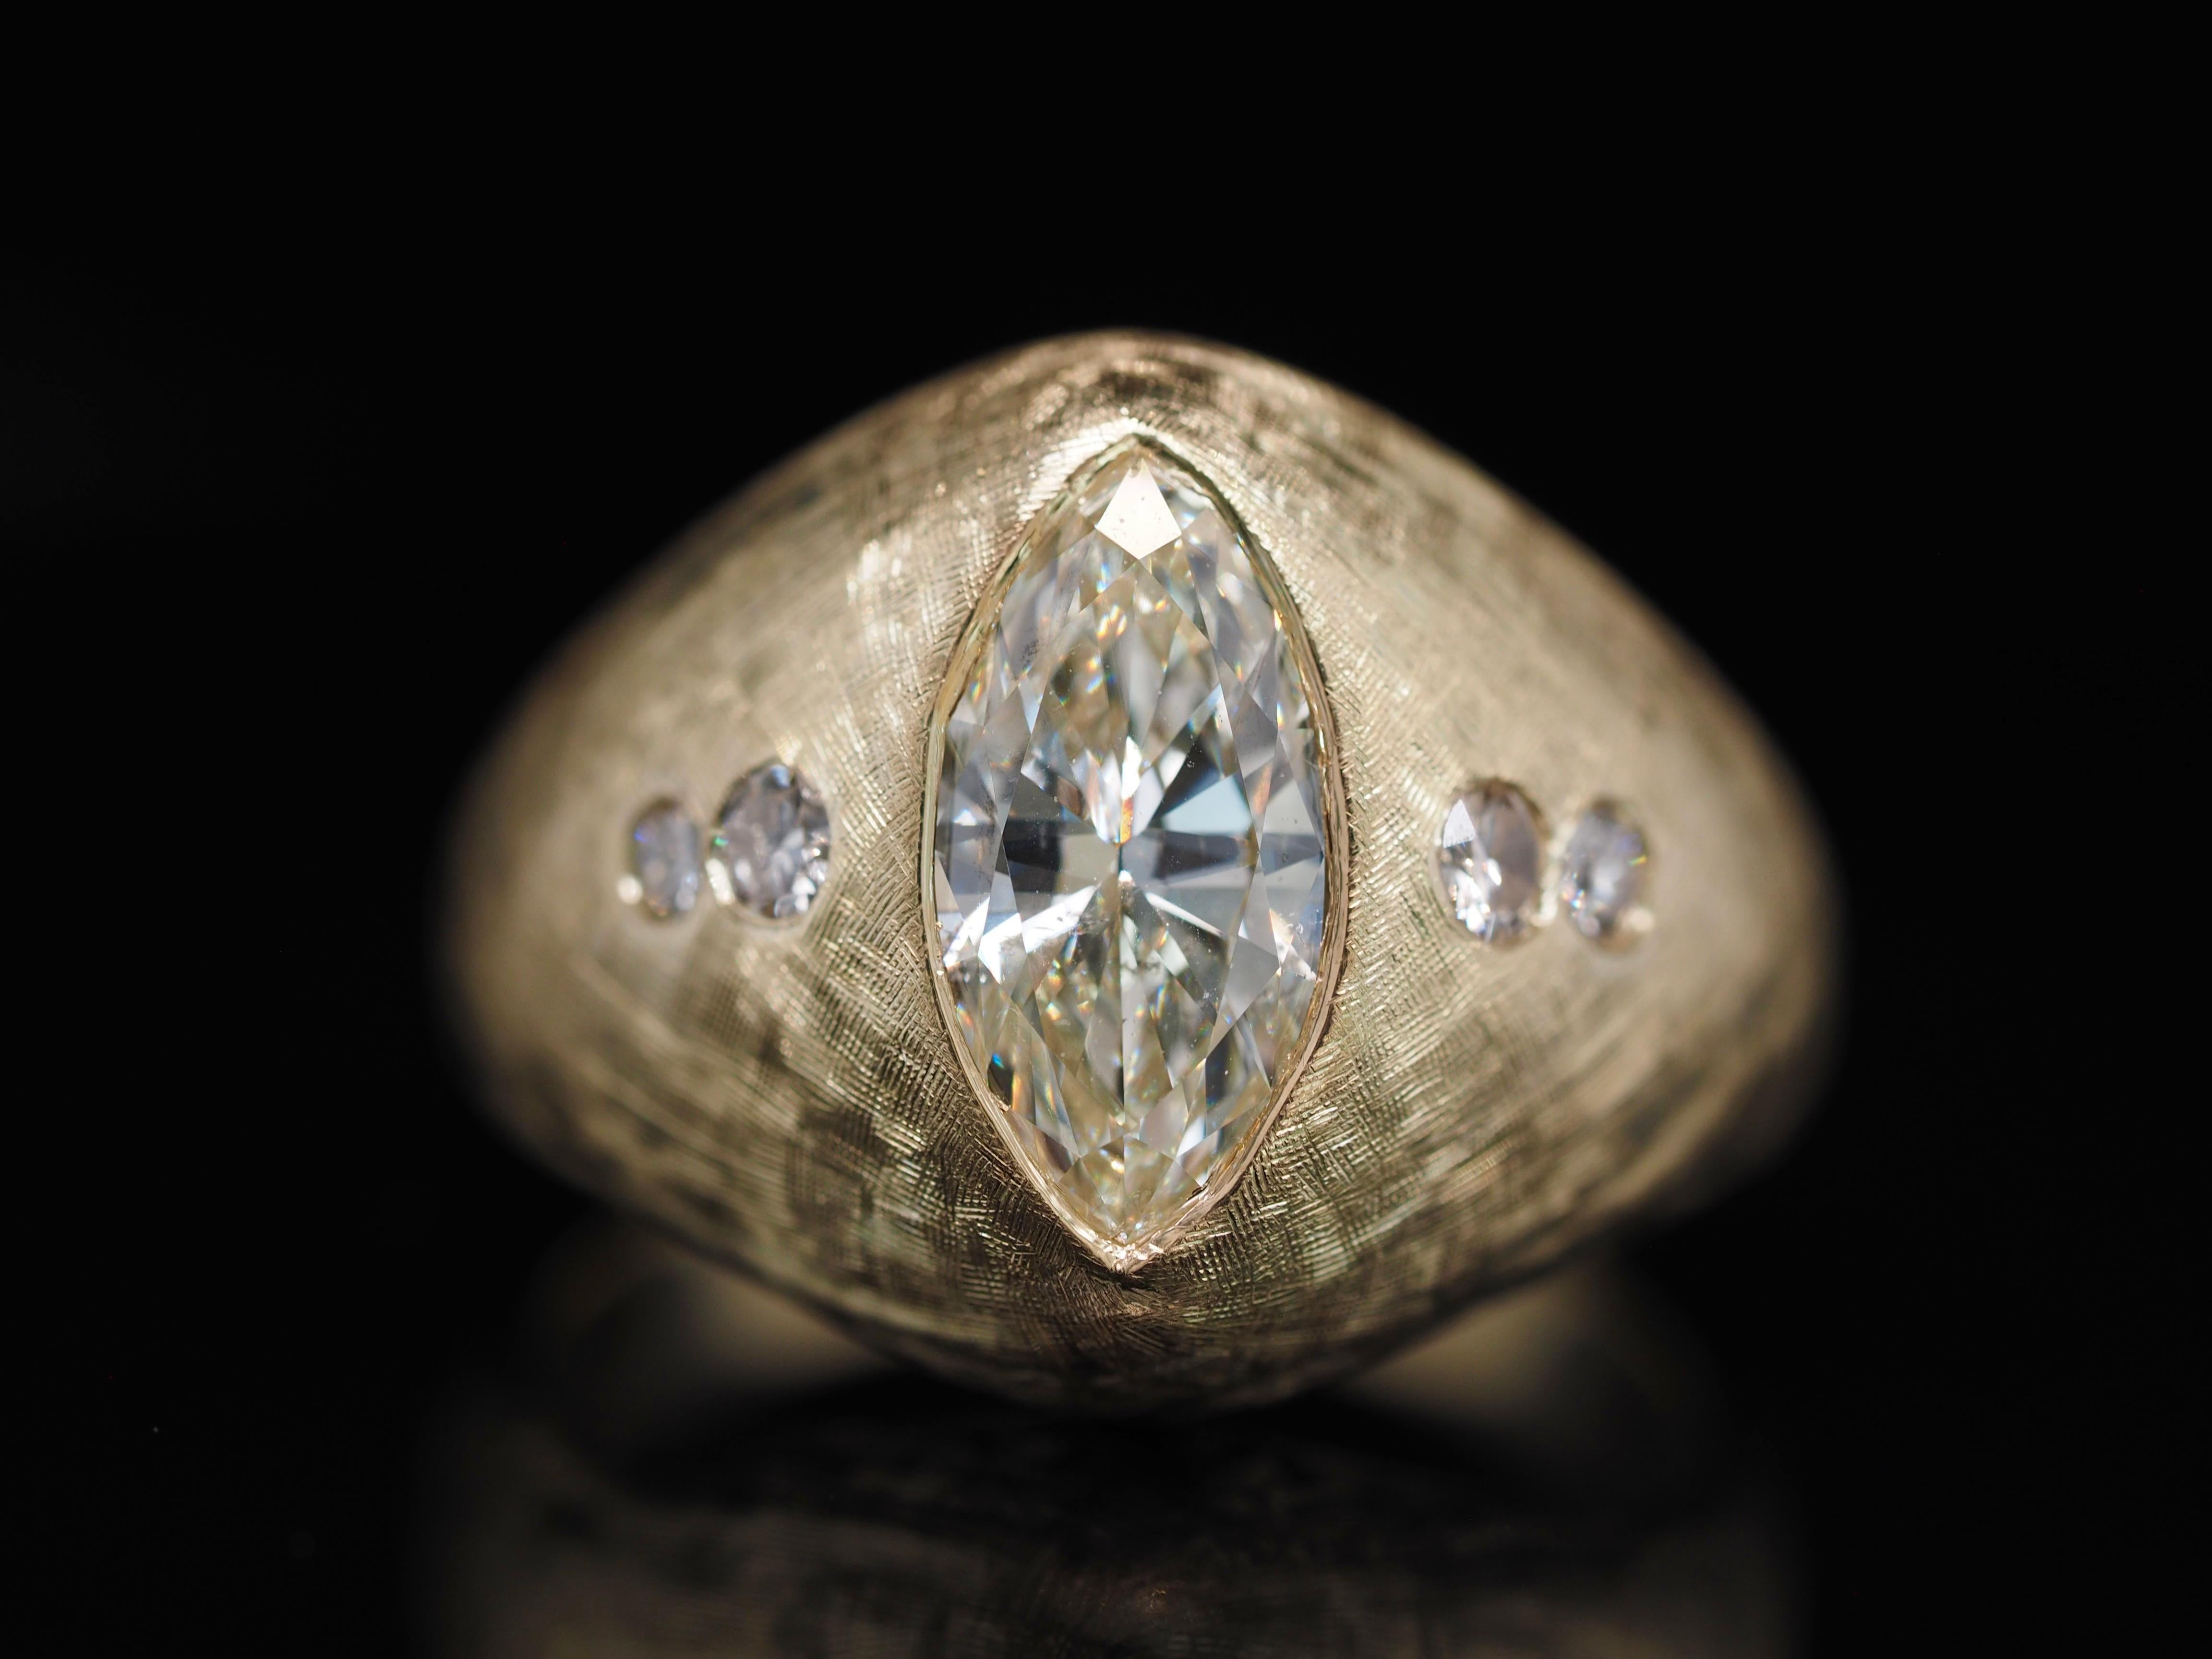 This retro ring is truly one of a kind!  It has an  incredible matte finish creating the perfect contrast between the diamonds and metal. The Center is an incredible 2.10ct Marquise diamond, with accented diamonds on both ends.  A sleek deign that